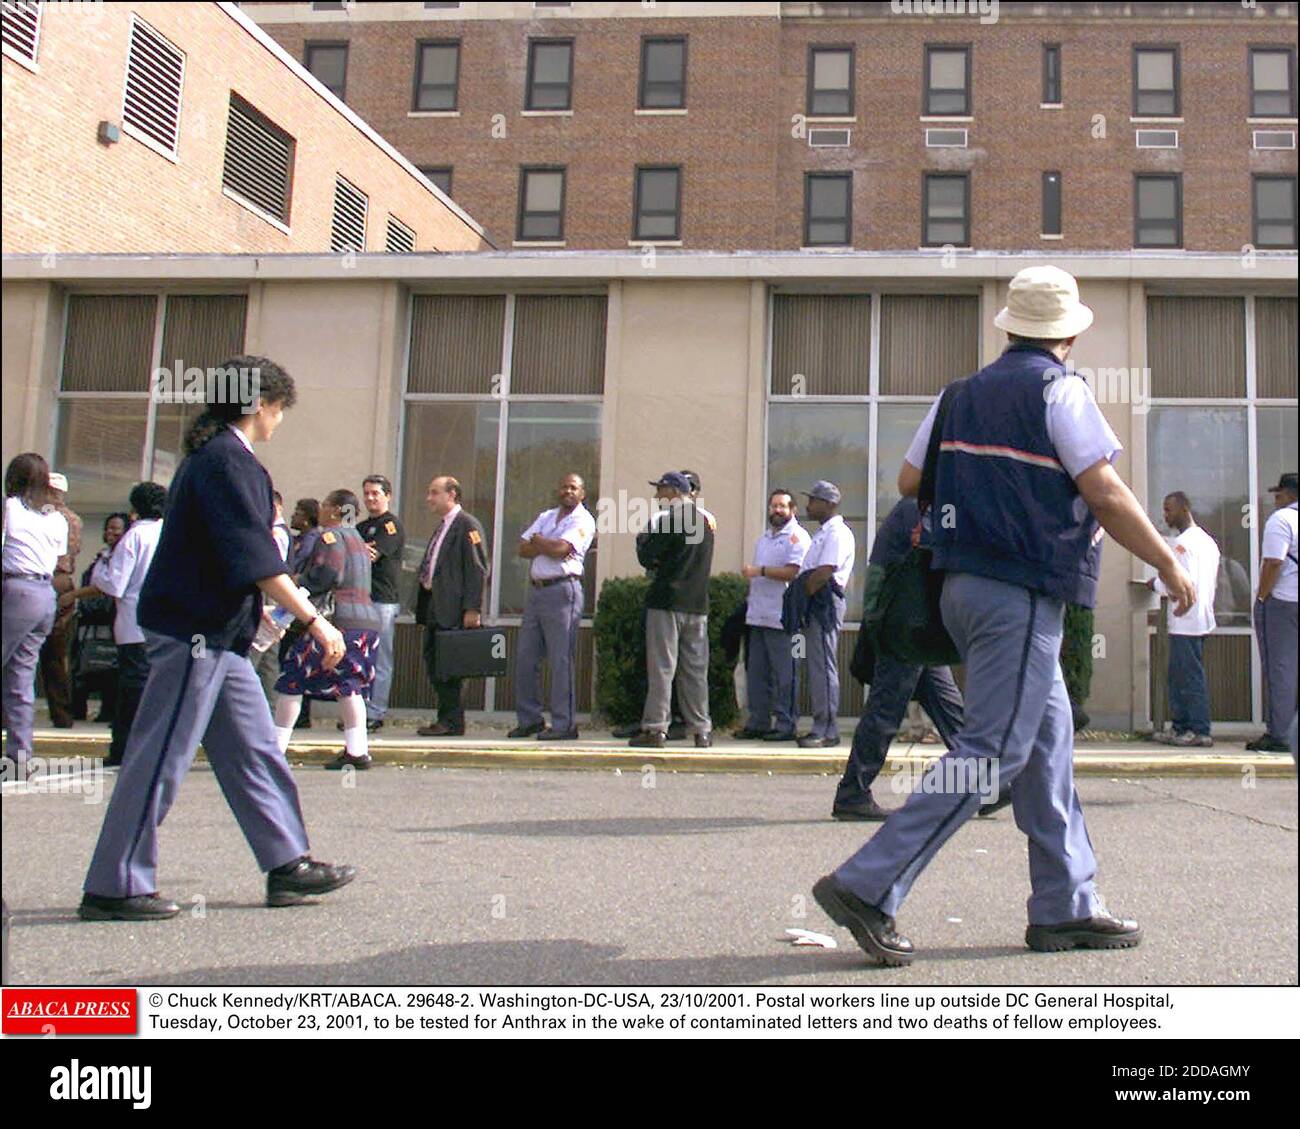 NO FILM, NO VIDEO, NO TV, NO DOCUMENTARY - © Chuck Kennedy/KRT/ABACA. 29648-2. Washington-DC-USA, 23/10/2001. Postal workers line up outside DC General Hospital, Tuesday, October 23, 2001, to be tested for Anthrax in the wake of contaminated letters and two deaths of fellow employees. Stock Photo